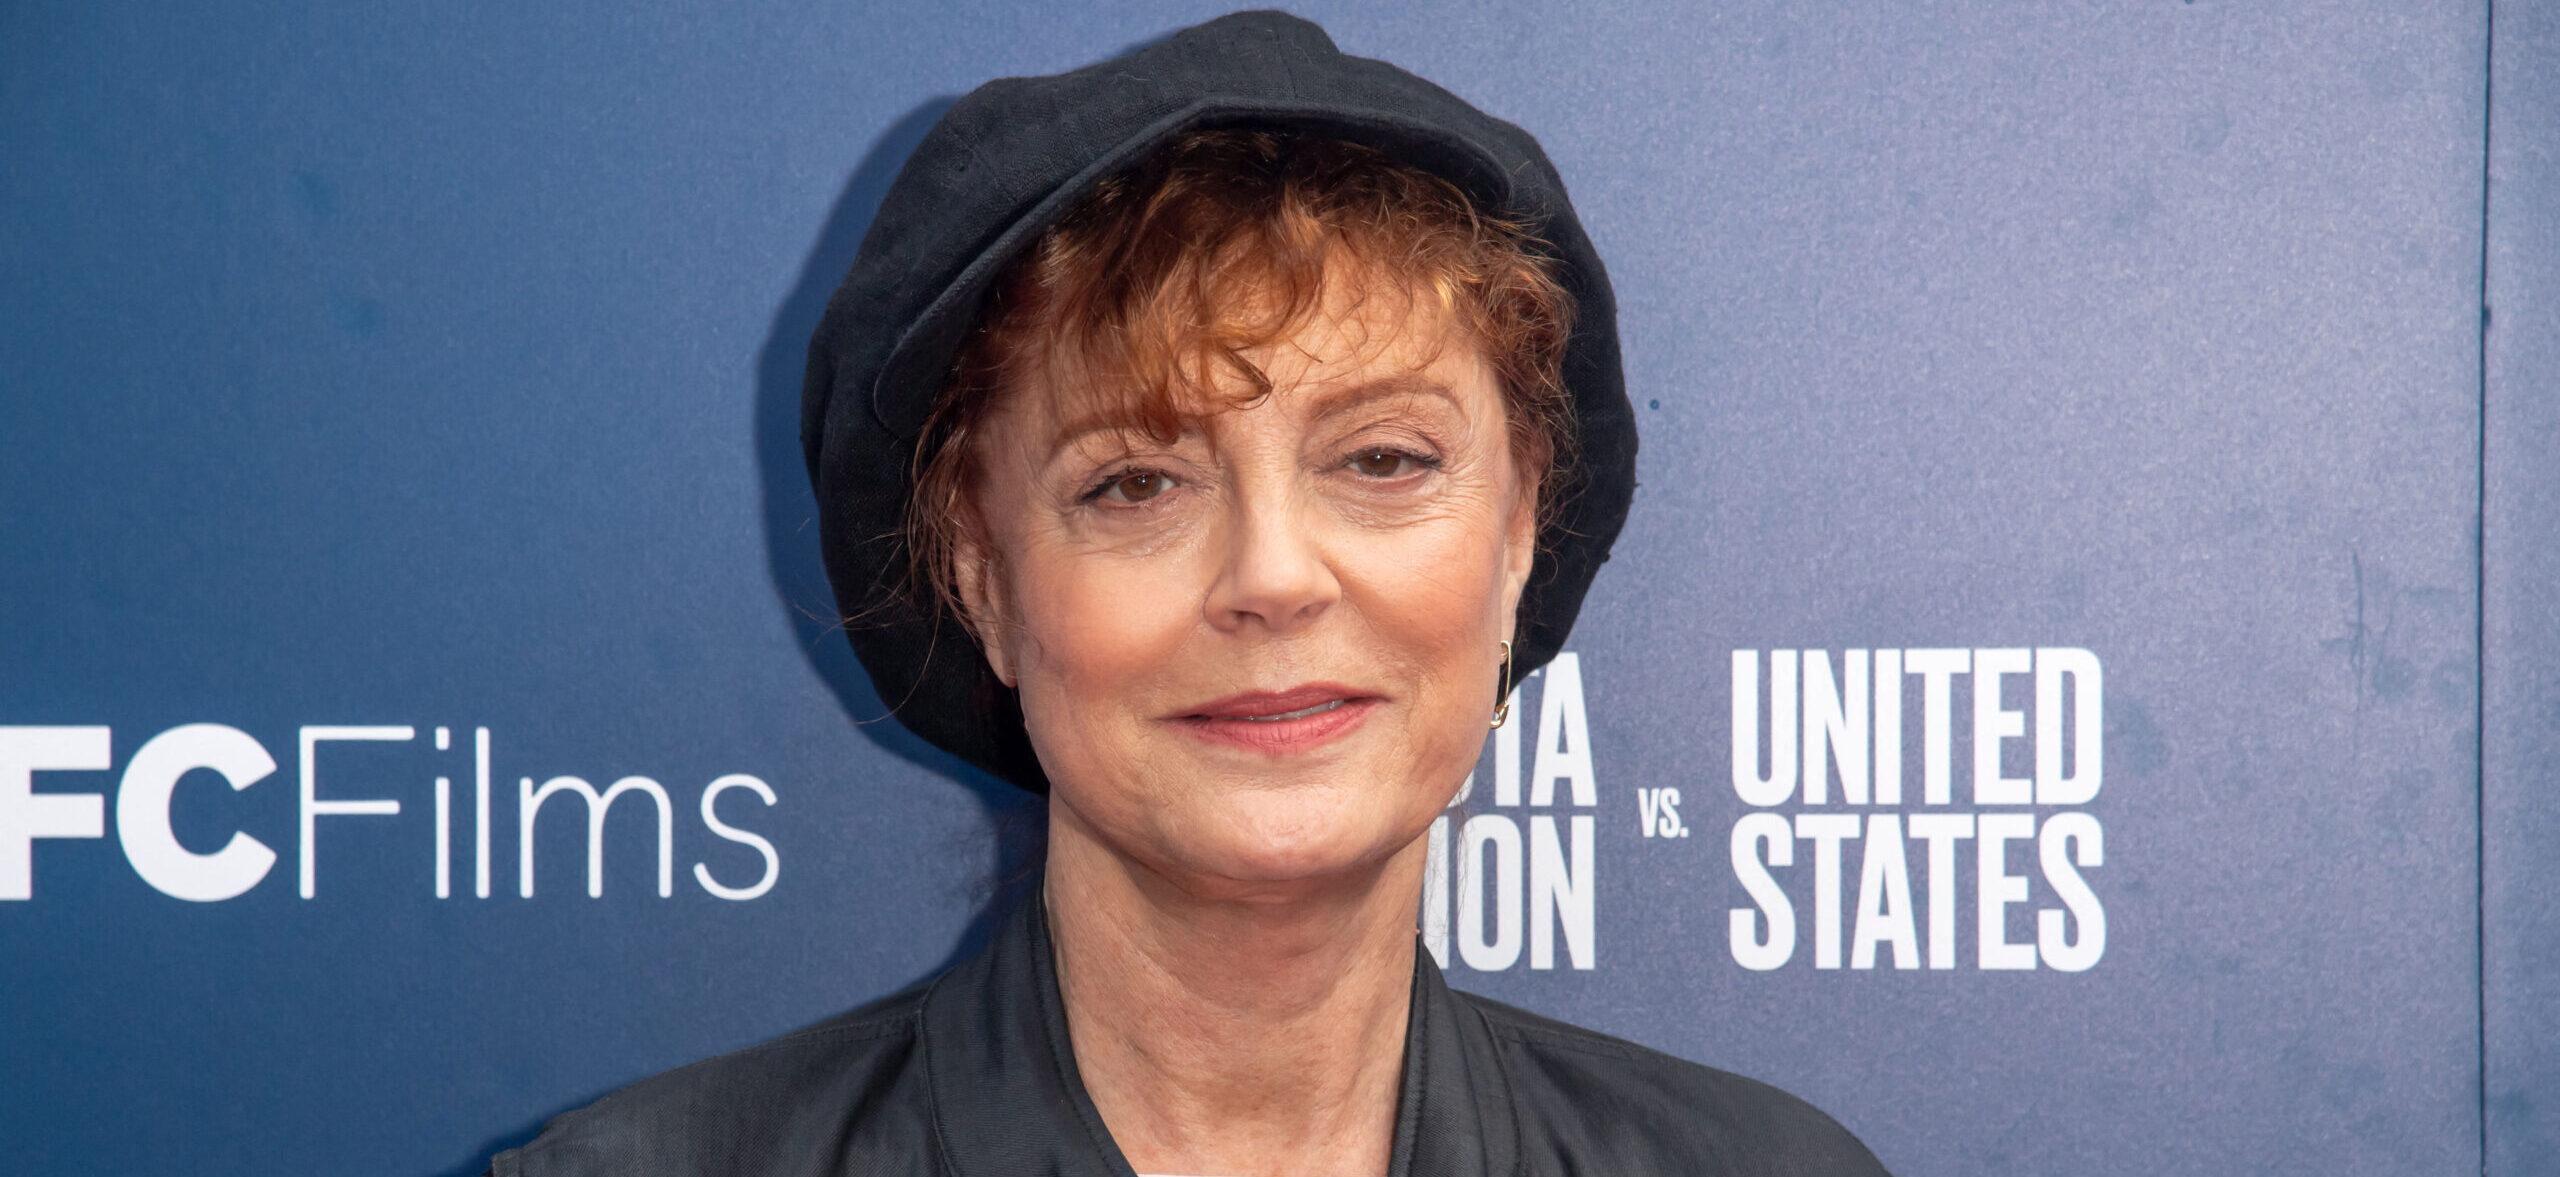 Susan Sarandon Loses Film Project After Controversial Comment About Jews In America